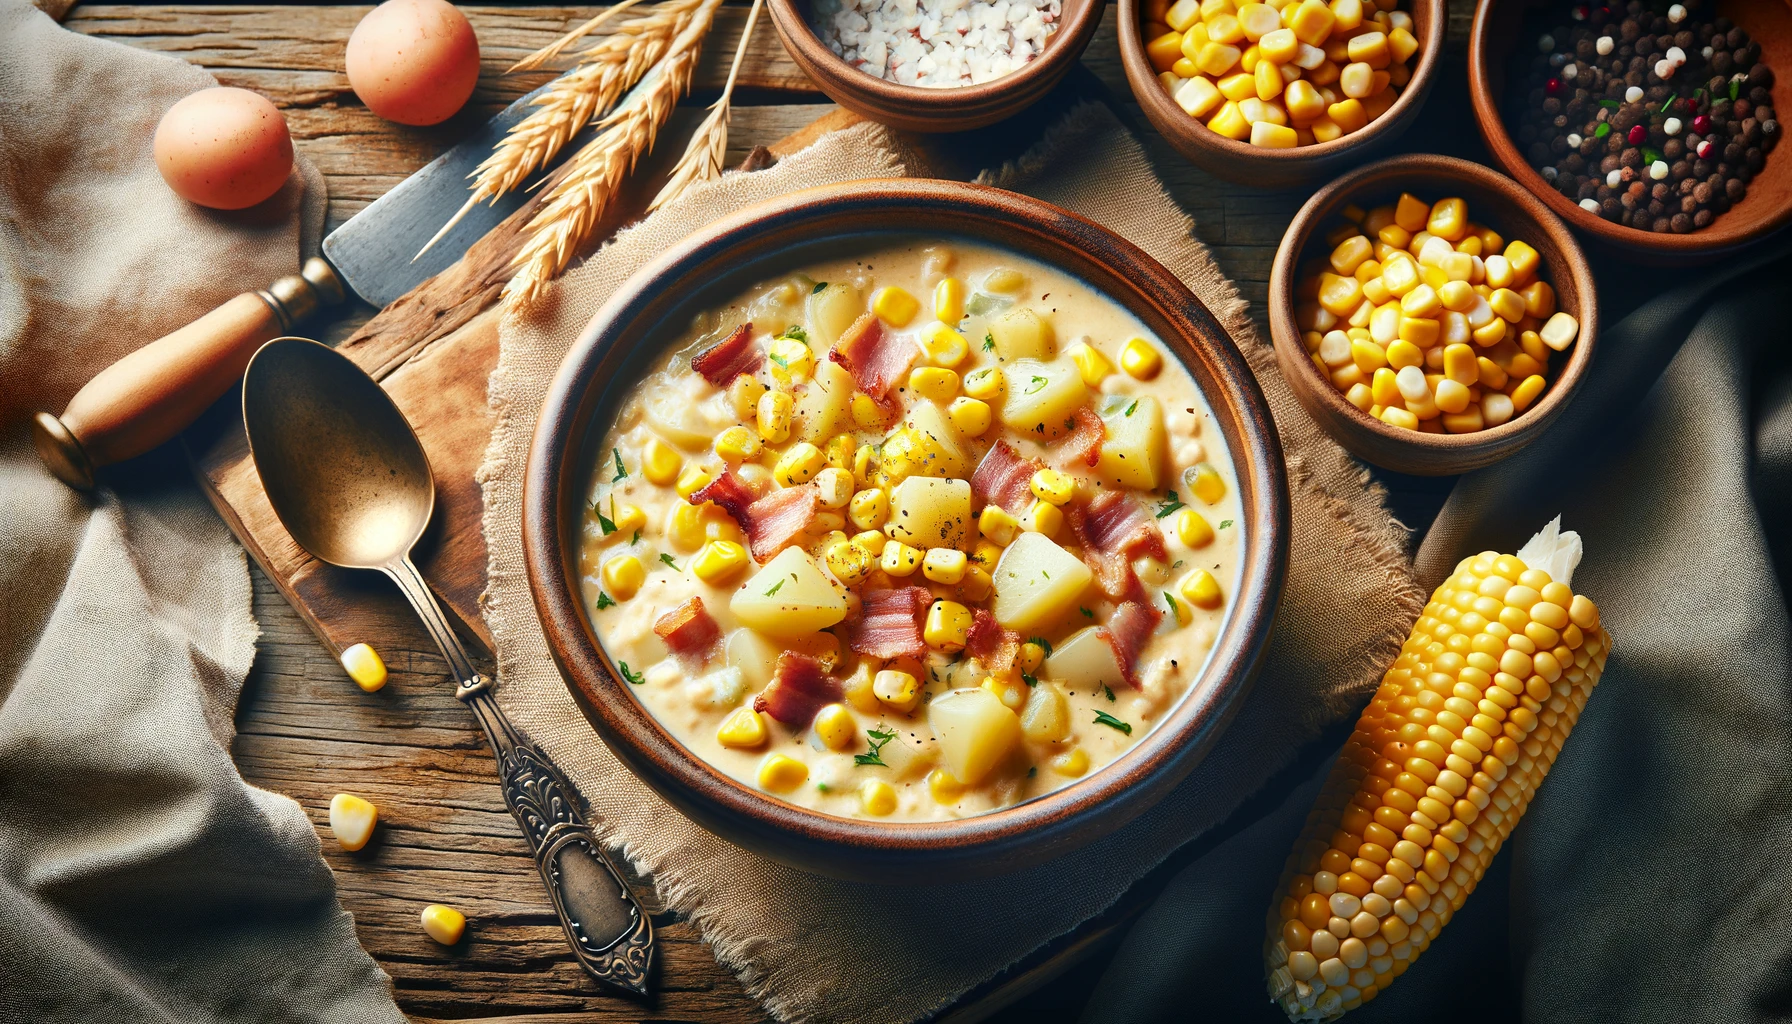 Hearty corn chowder with bacon and potato in bowl.